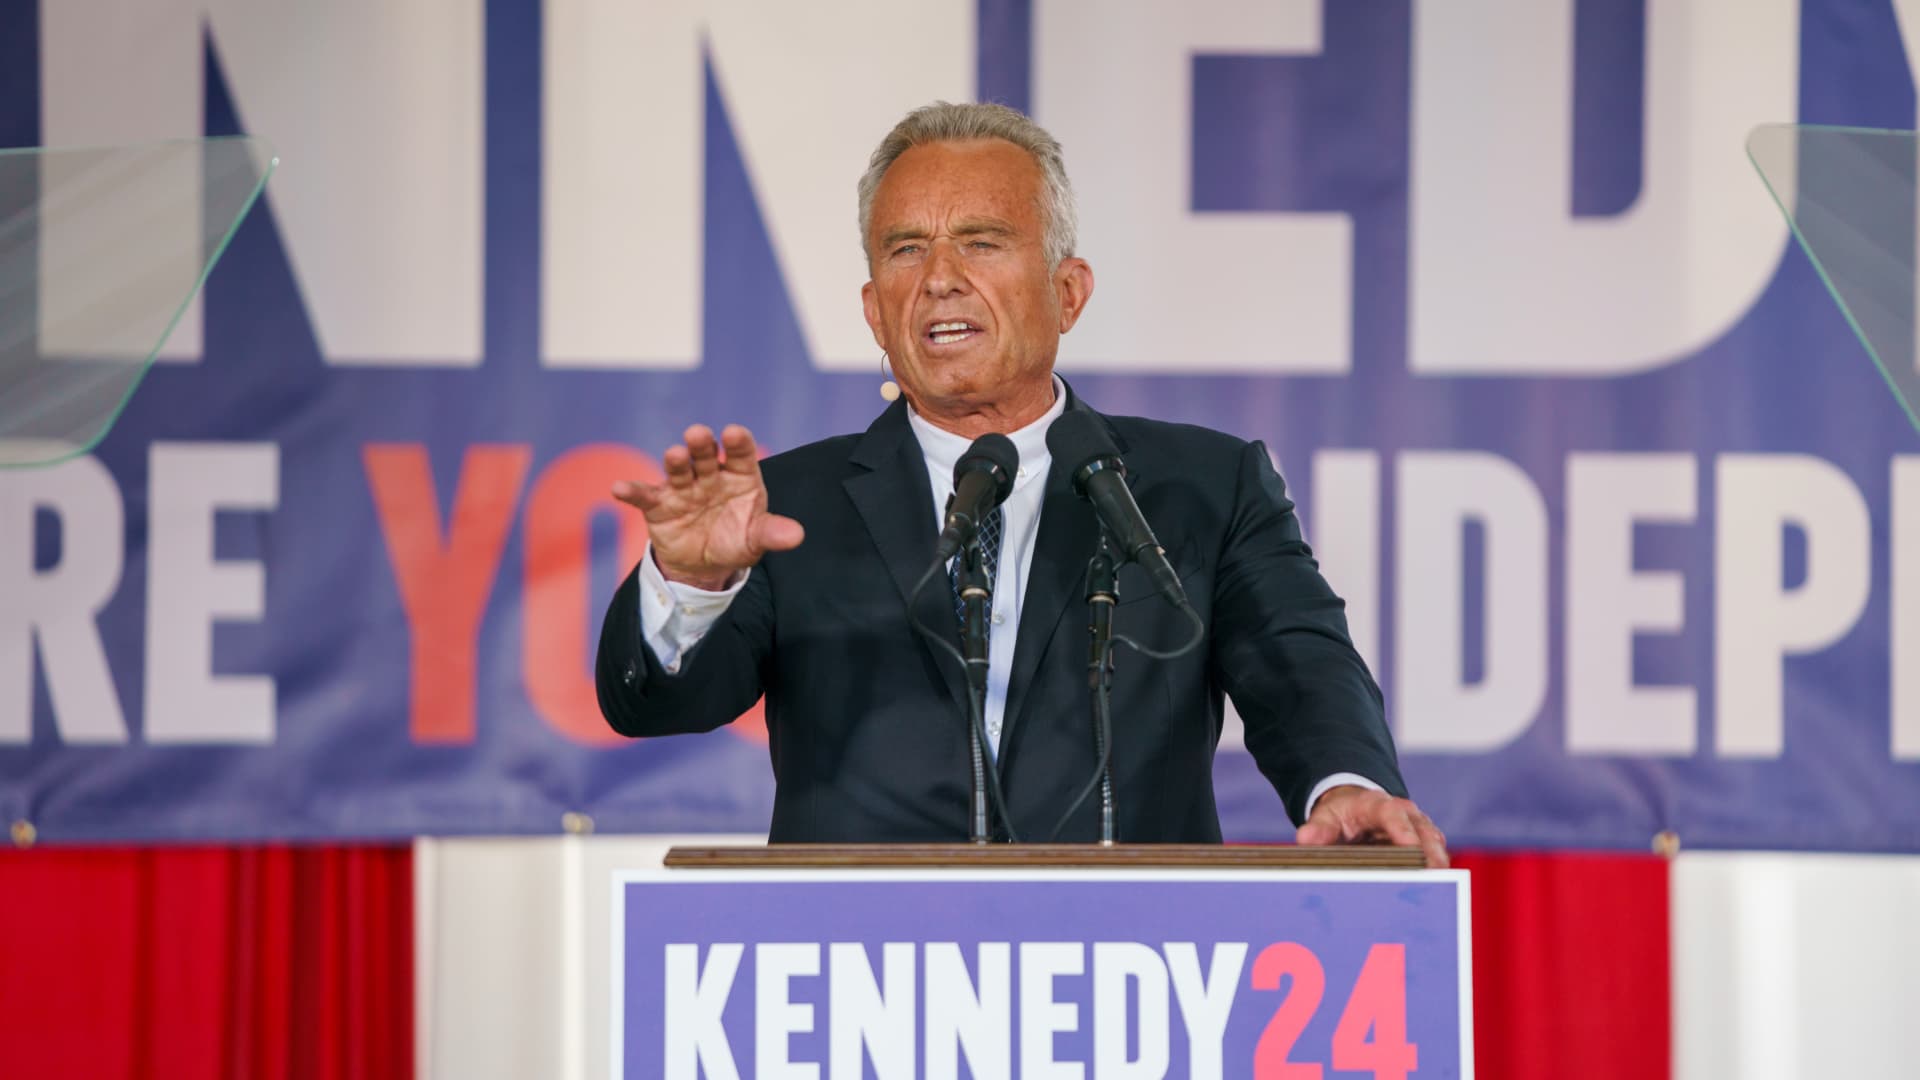 Robert F. Kennedy Jr. to run for president as an independent, end Democratic primary campaign